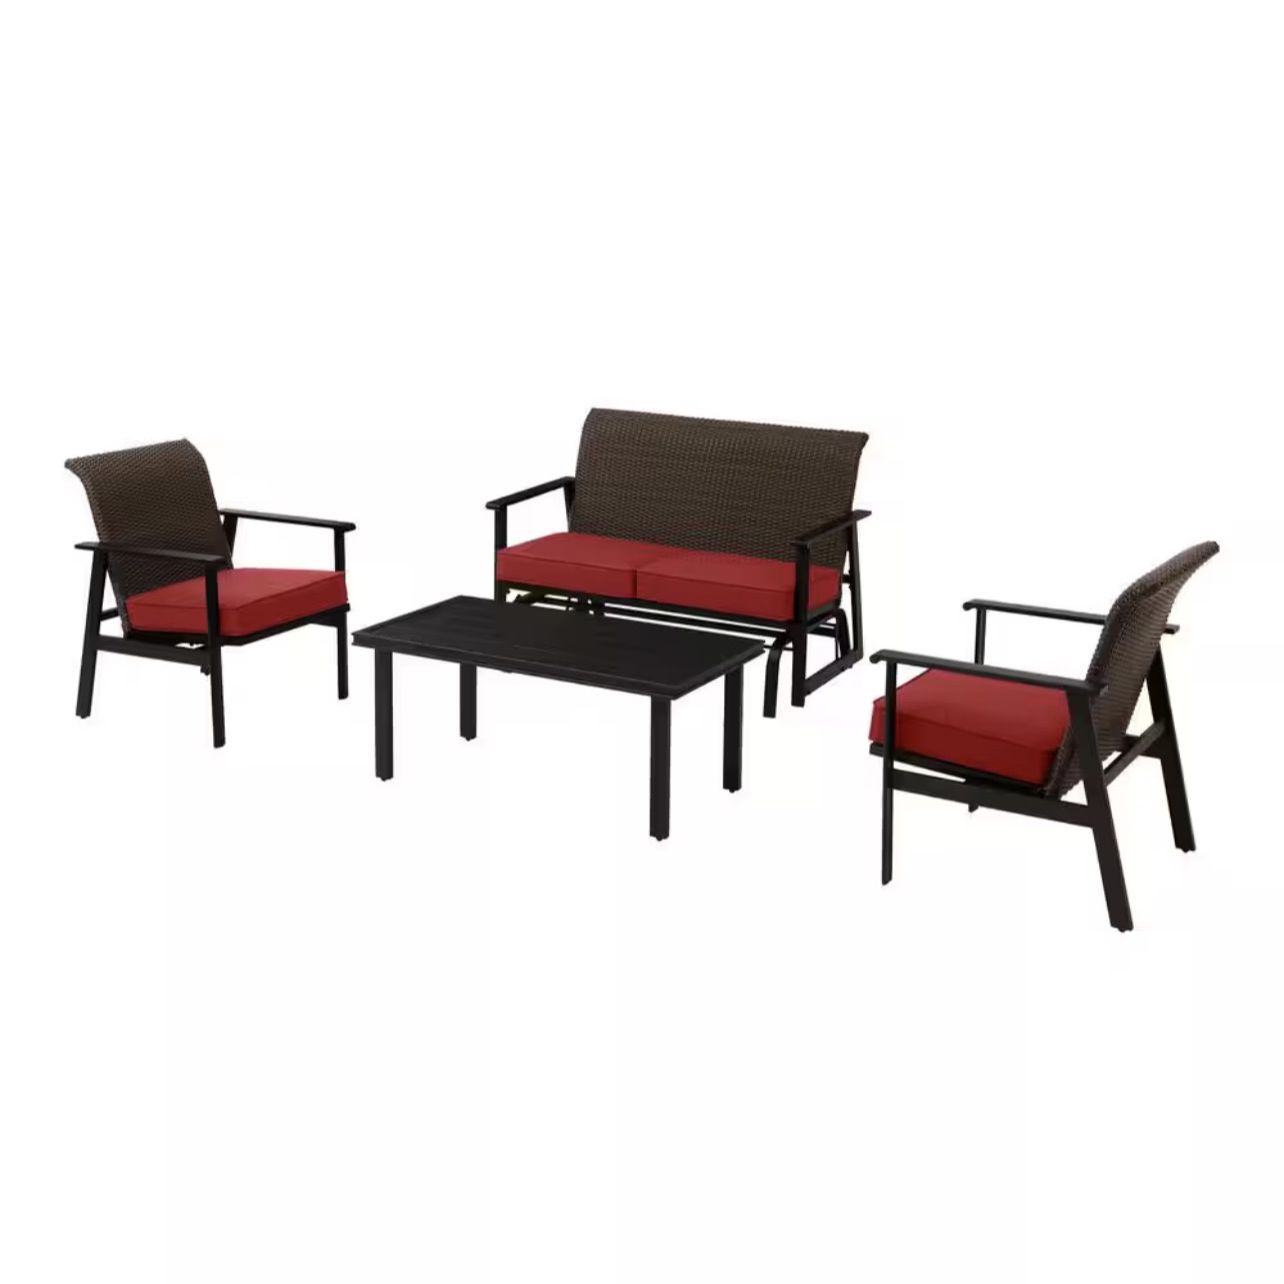 Hampton Bay Morgan Springs Brown 4-Piece Woven Outdoor Padded Wicker Deep Seating Set with CushionGuard Chili Red Cushions